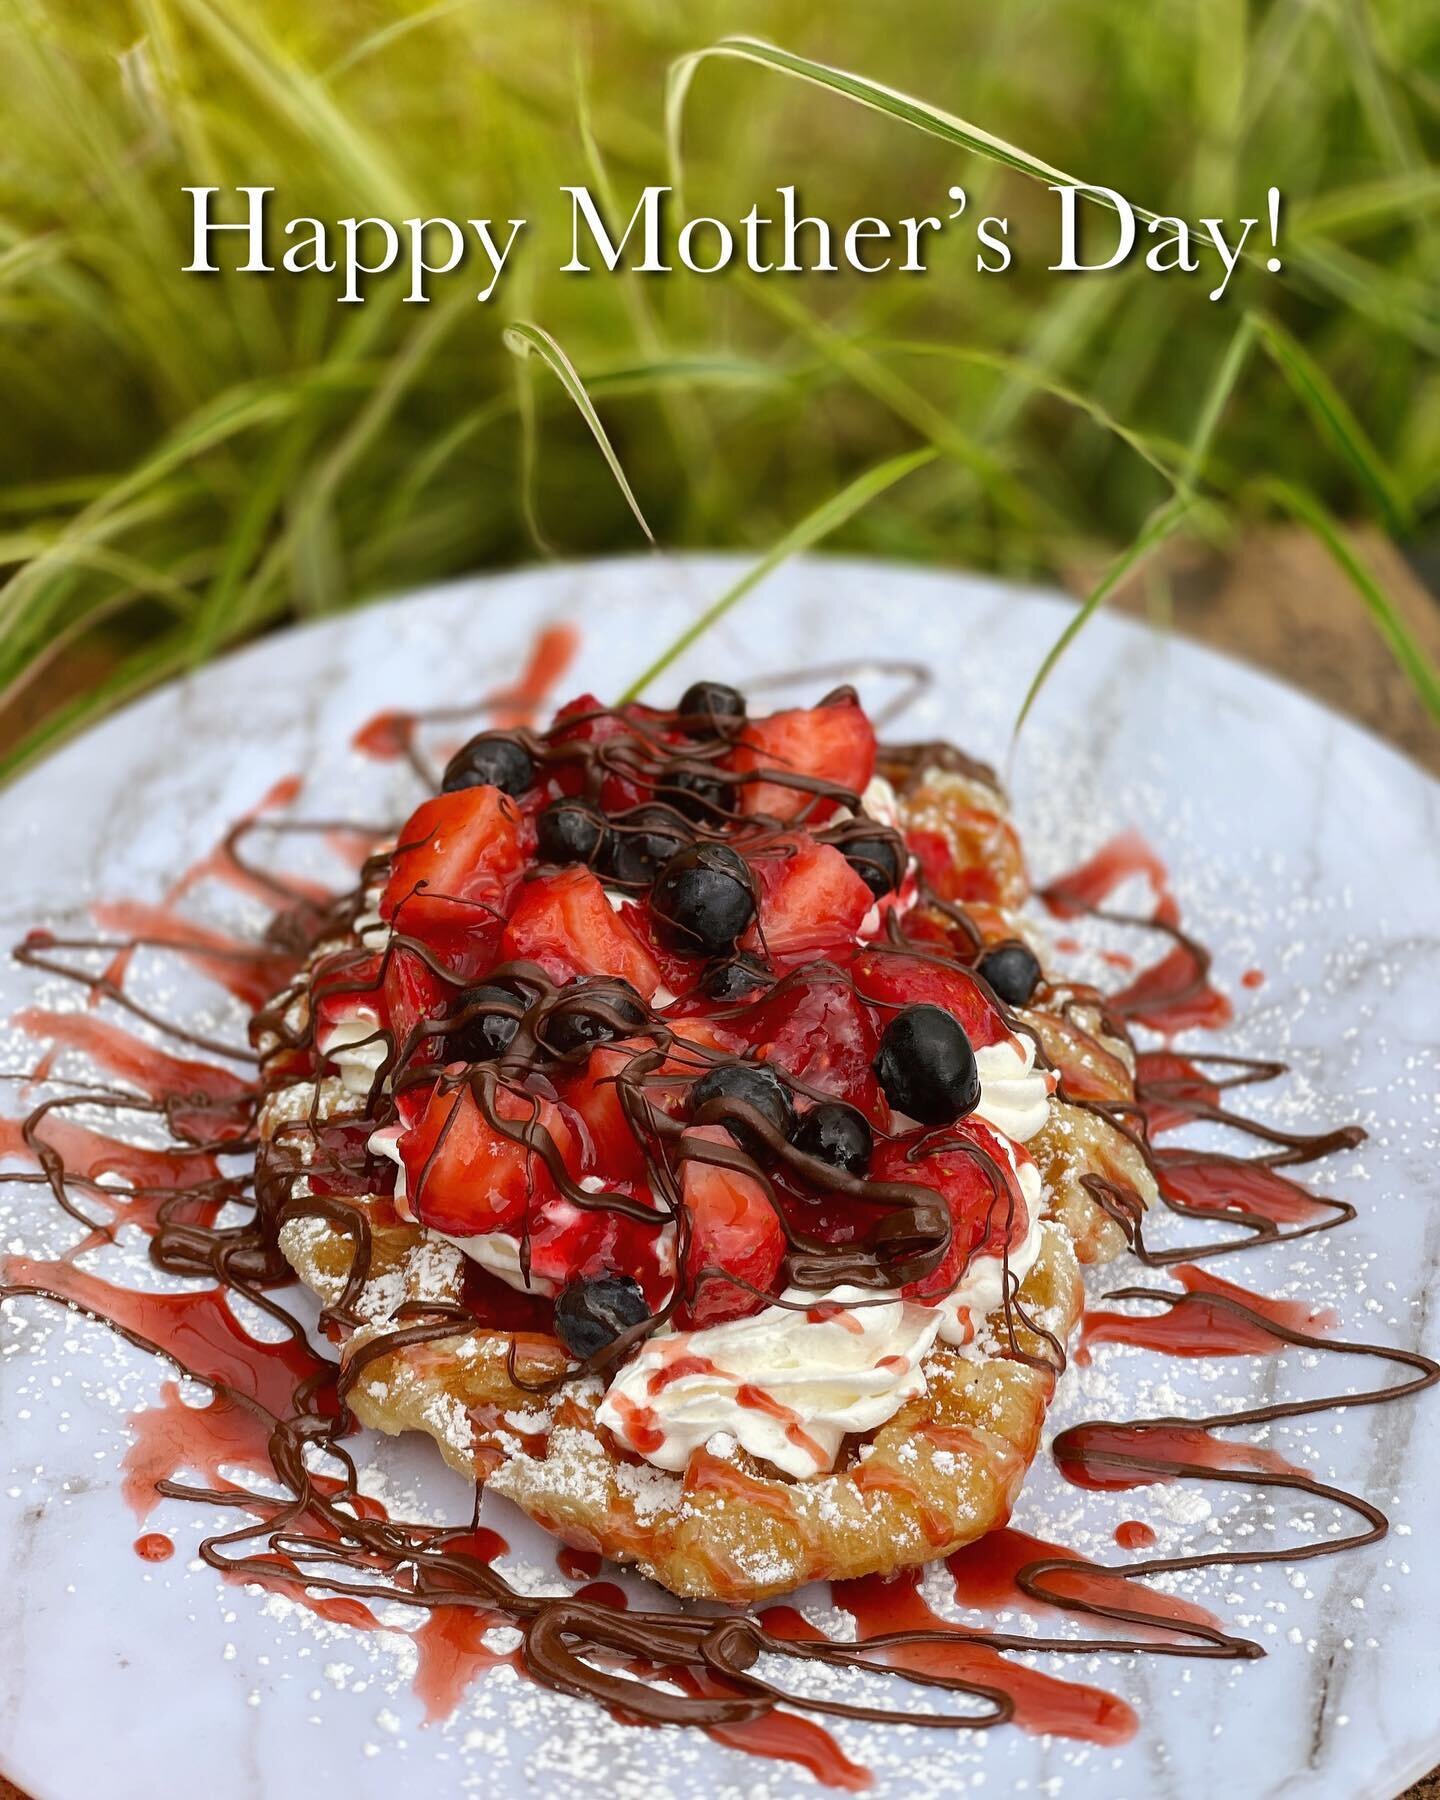 Happy Mother&rsquo;s Day! This Mother&rsquo;s Day (May 13th), celebrate with our berry shortcake Croffle special! A delicious Croffle topped with strawberries, raspberry pur&eacute;e, blueberries, and chocolate sauce awaits your next treat craving!  